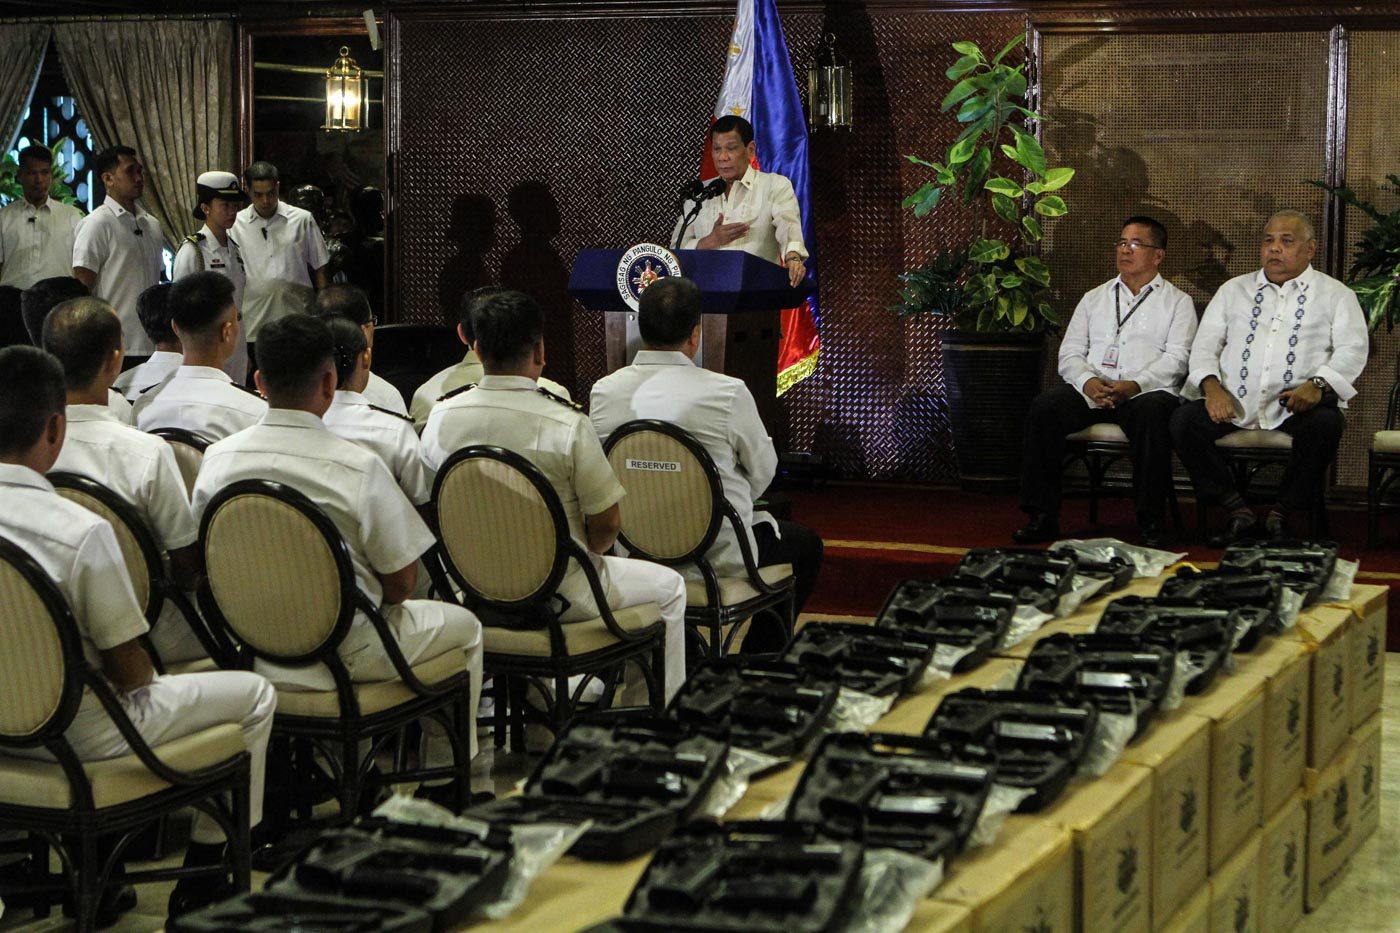 ADDED PROTECTION. The new caliber .45 pistols are on display as President Rodrigo Duterte gives his speech. Photo by Lito Boras/Rappler 